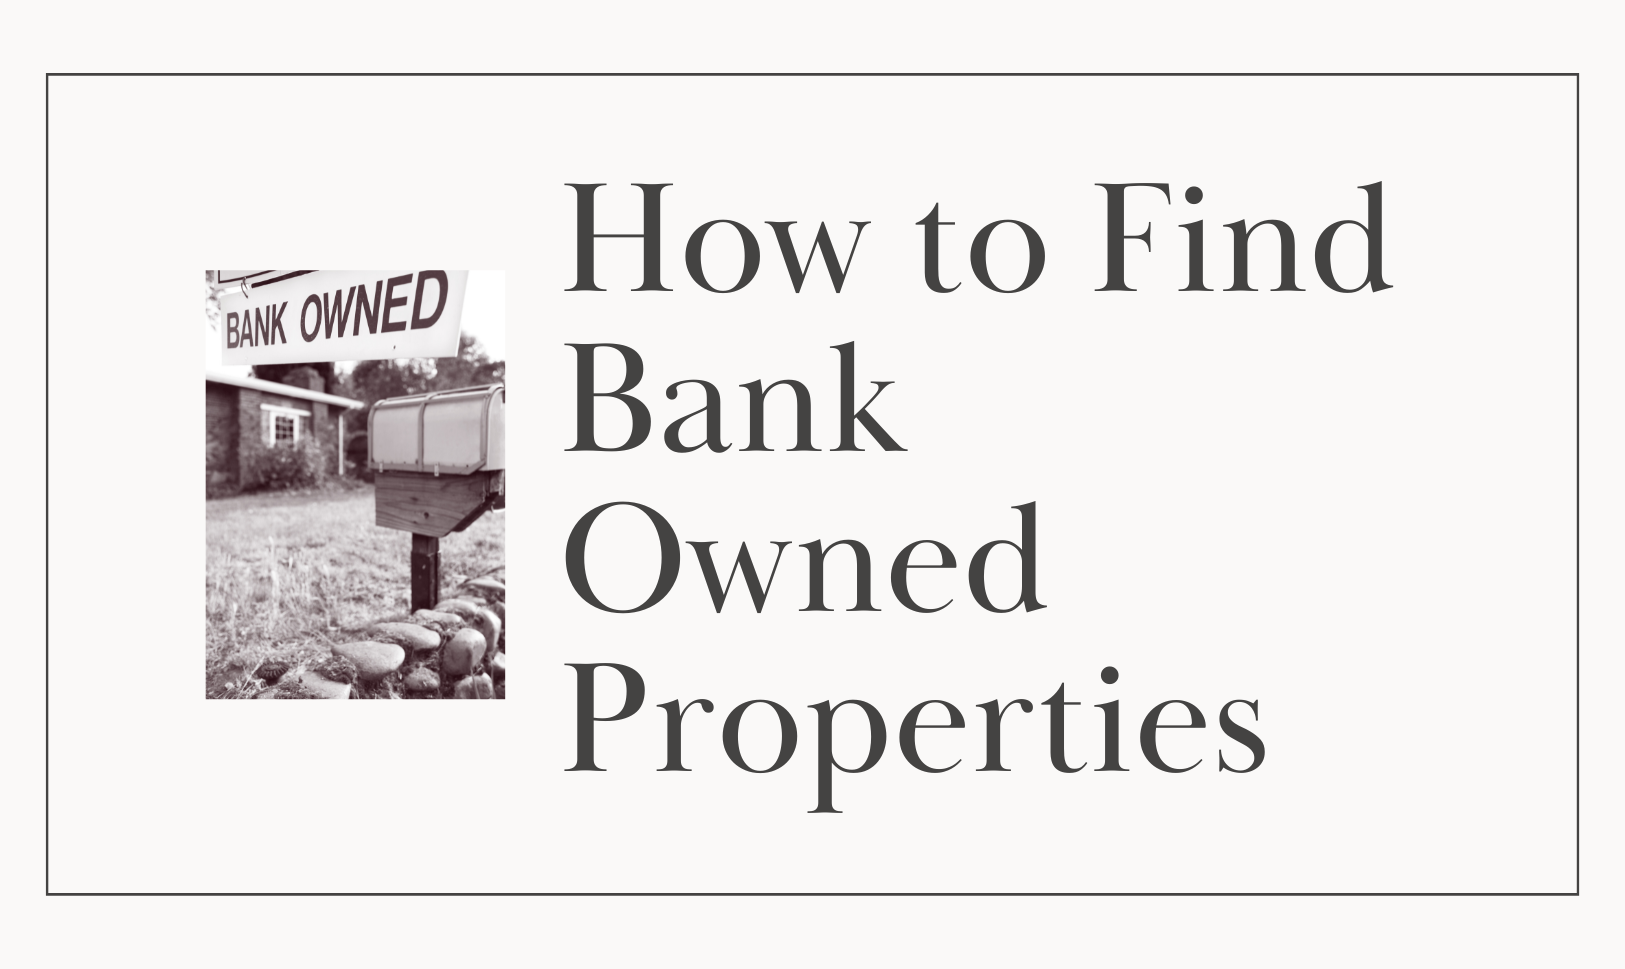 How to Find Bank Owned Properties cover picture with white background and black letters.